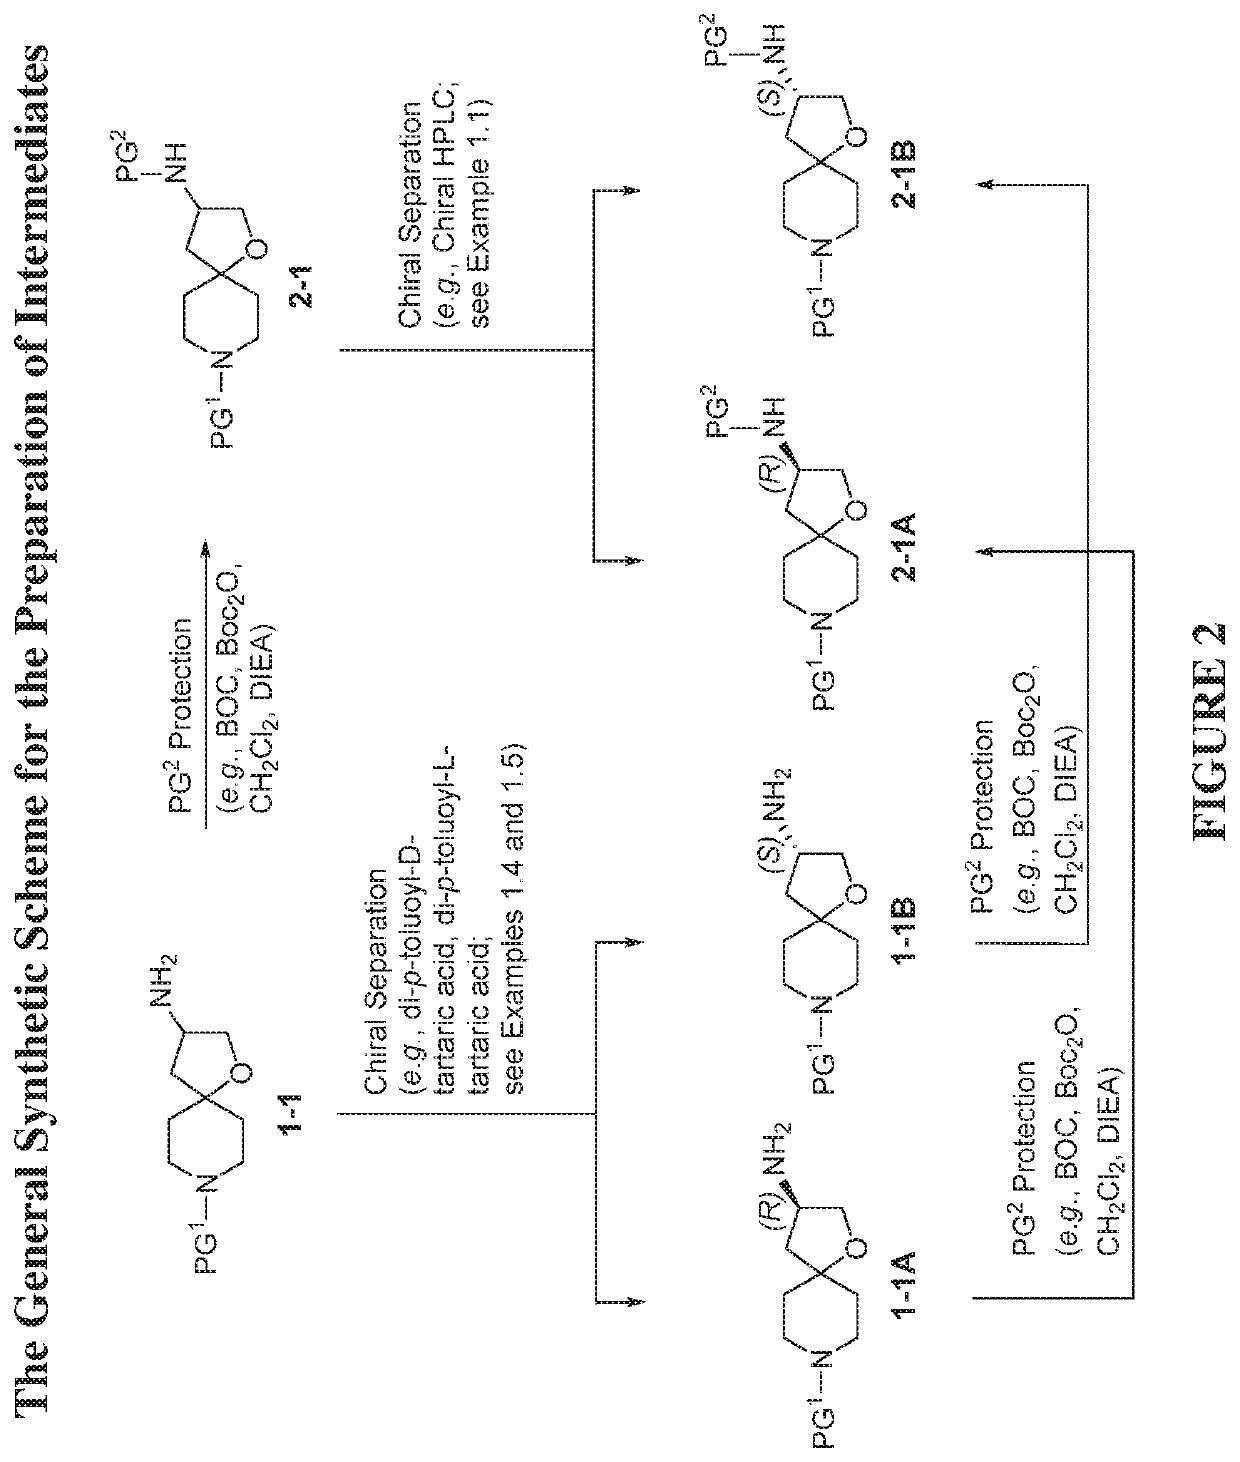 Modulators of the beta-3 adrenergic receptor useful for the treatment or prevention of heart failure and disorders related thereto